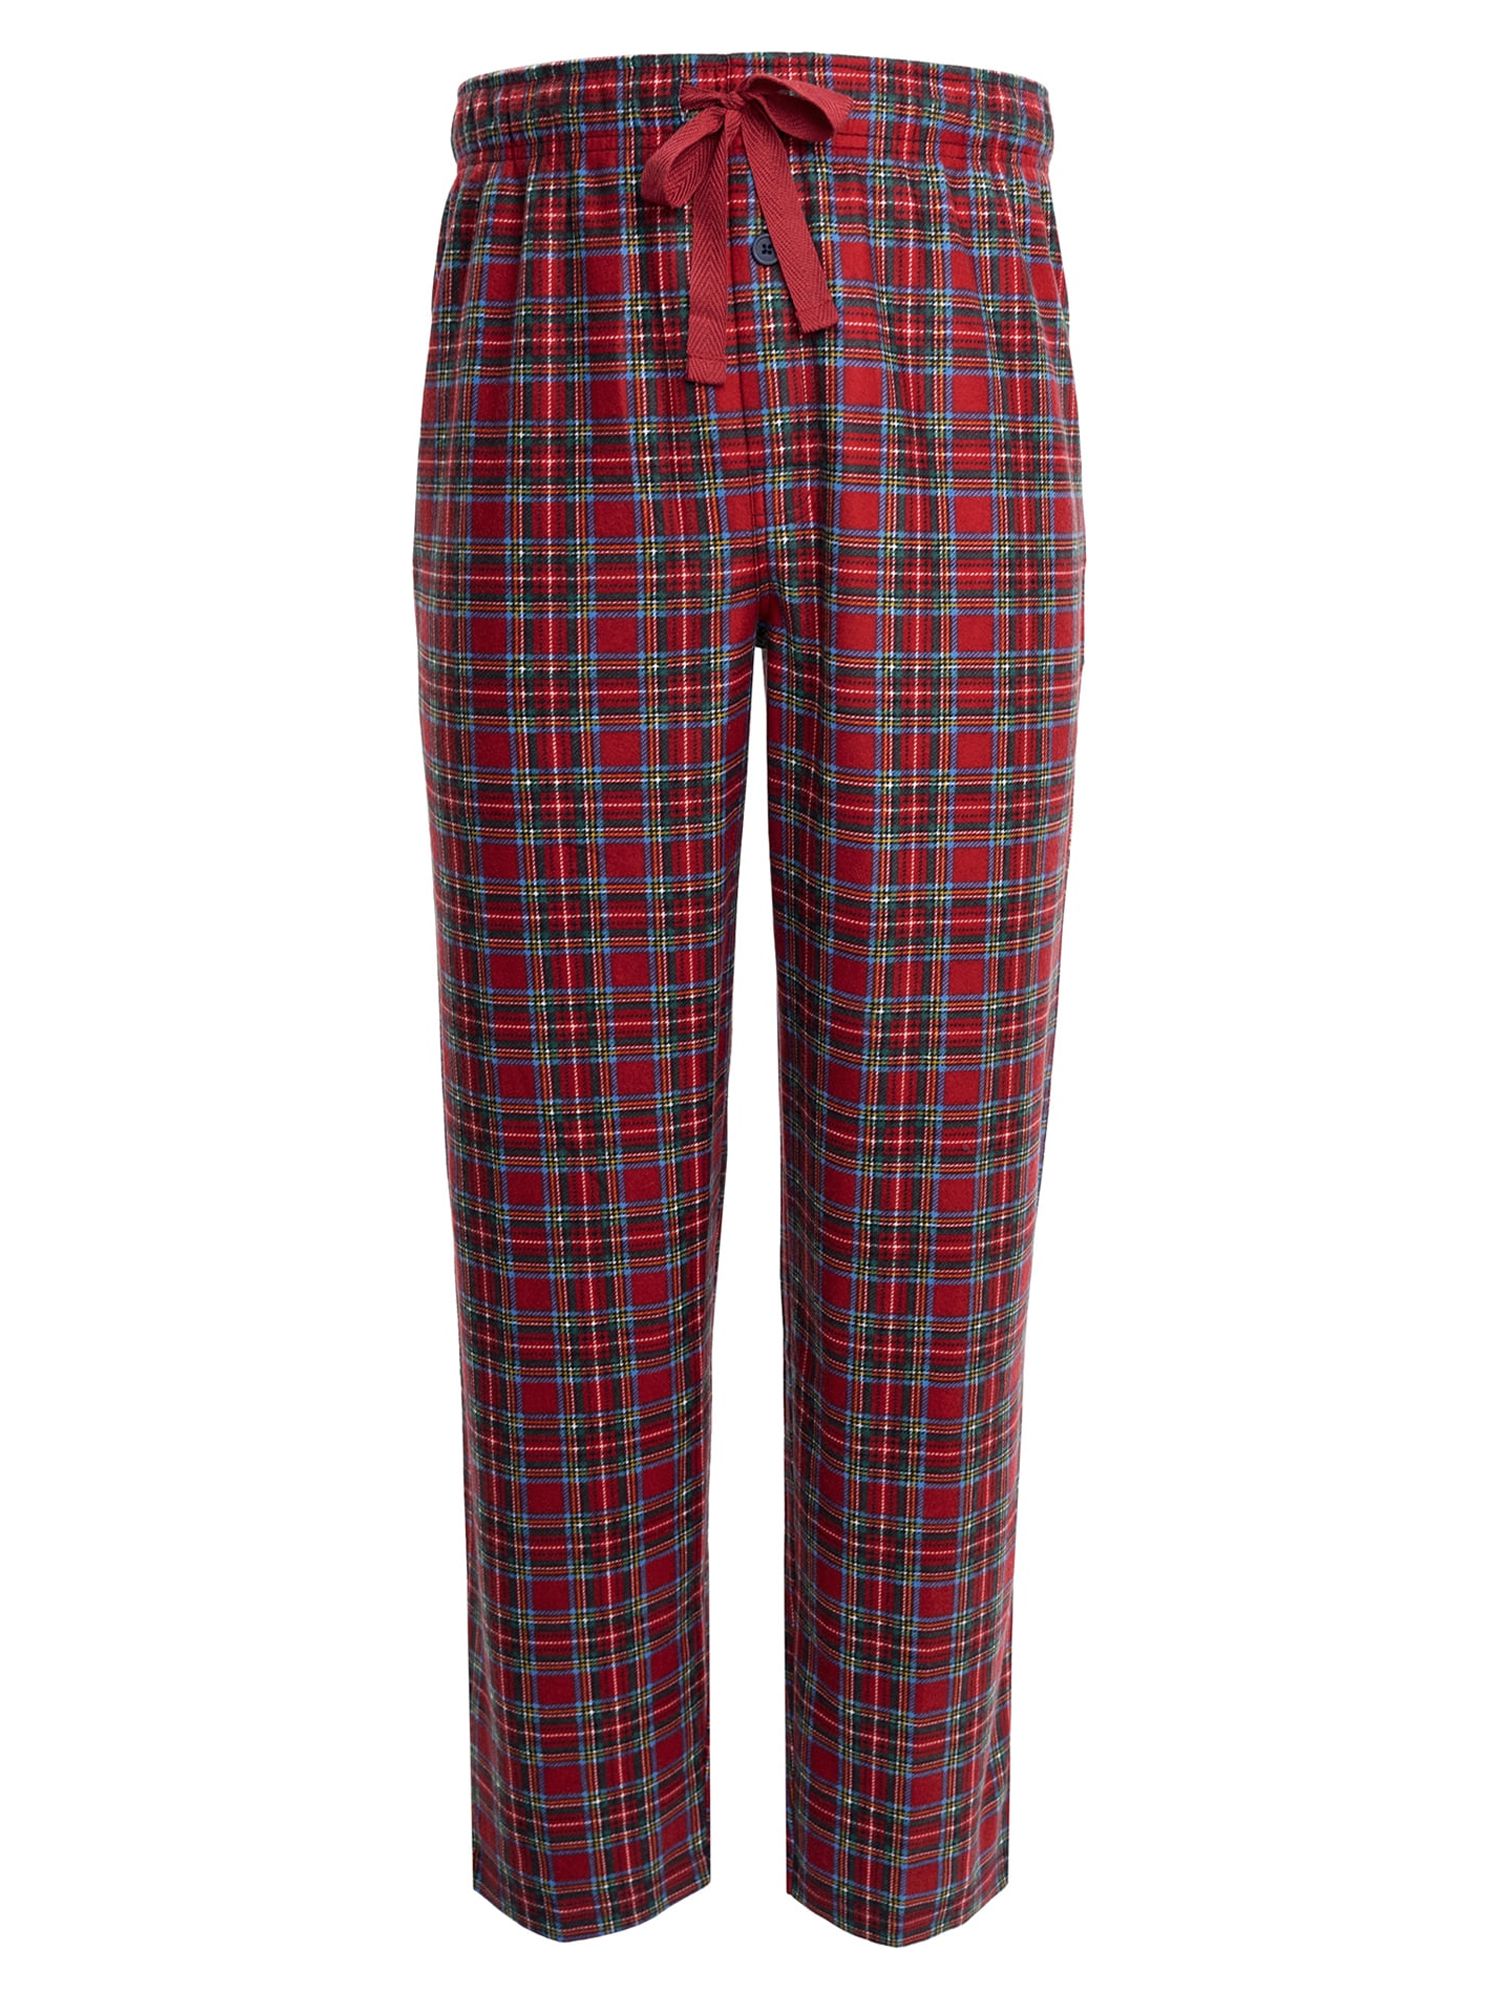 Fruit of the Loom Men's Holiday and Plaid Print Soft Microfleece Pajama Pant 2-Pack Bundle - image 14 of 15